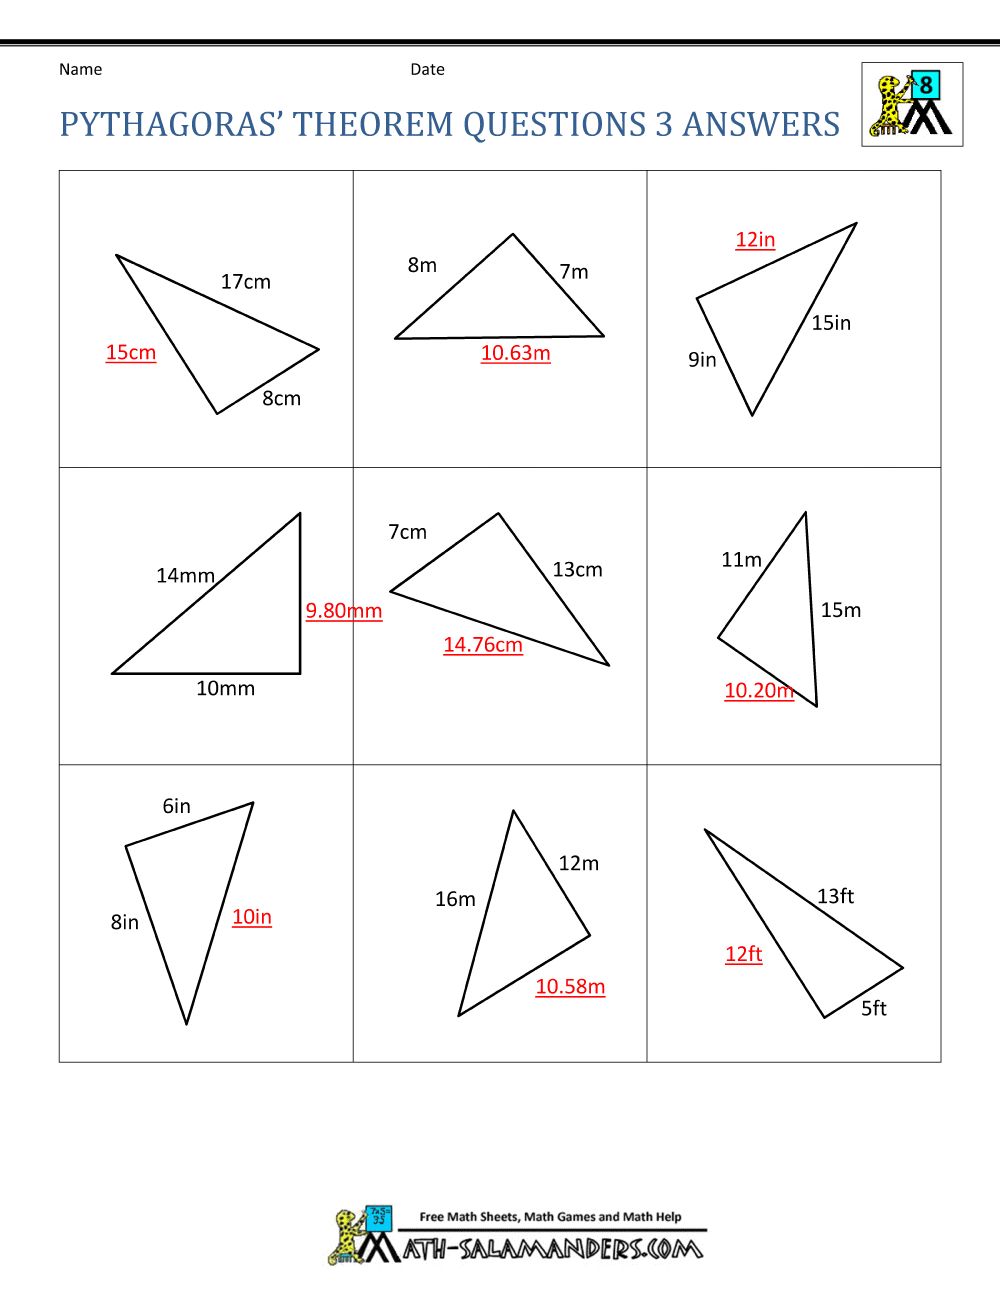 Pythagoras Theorem Questions With Pythagorean Theorem Worksheet Answers